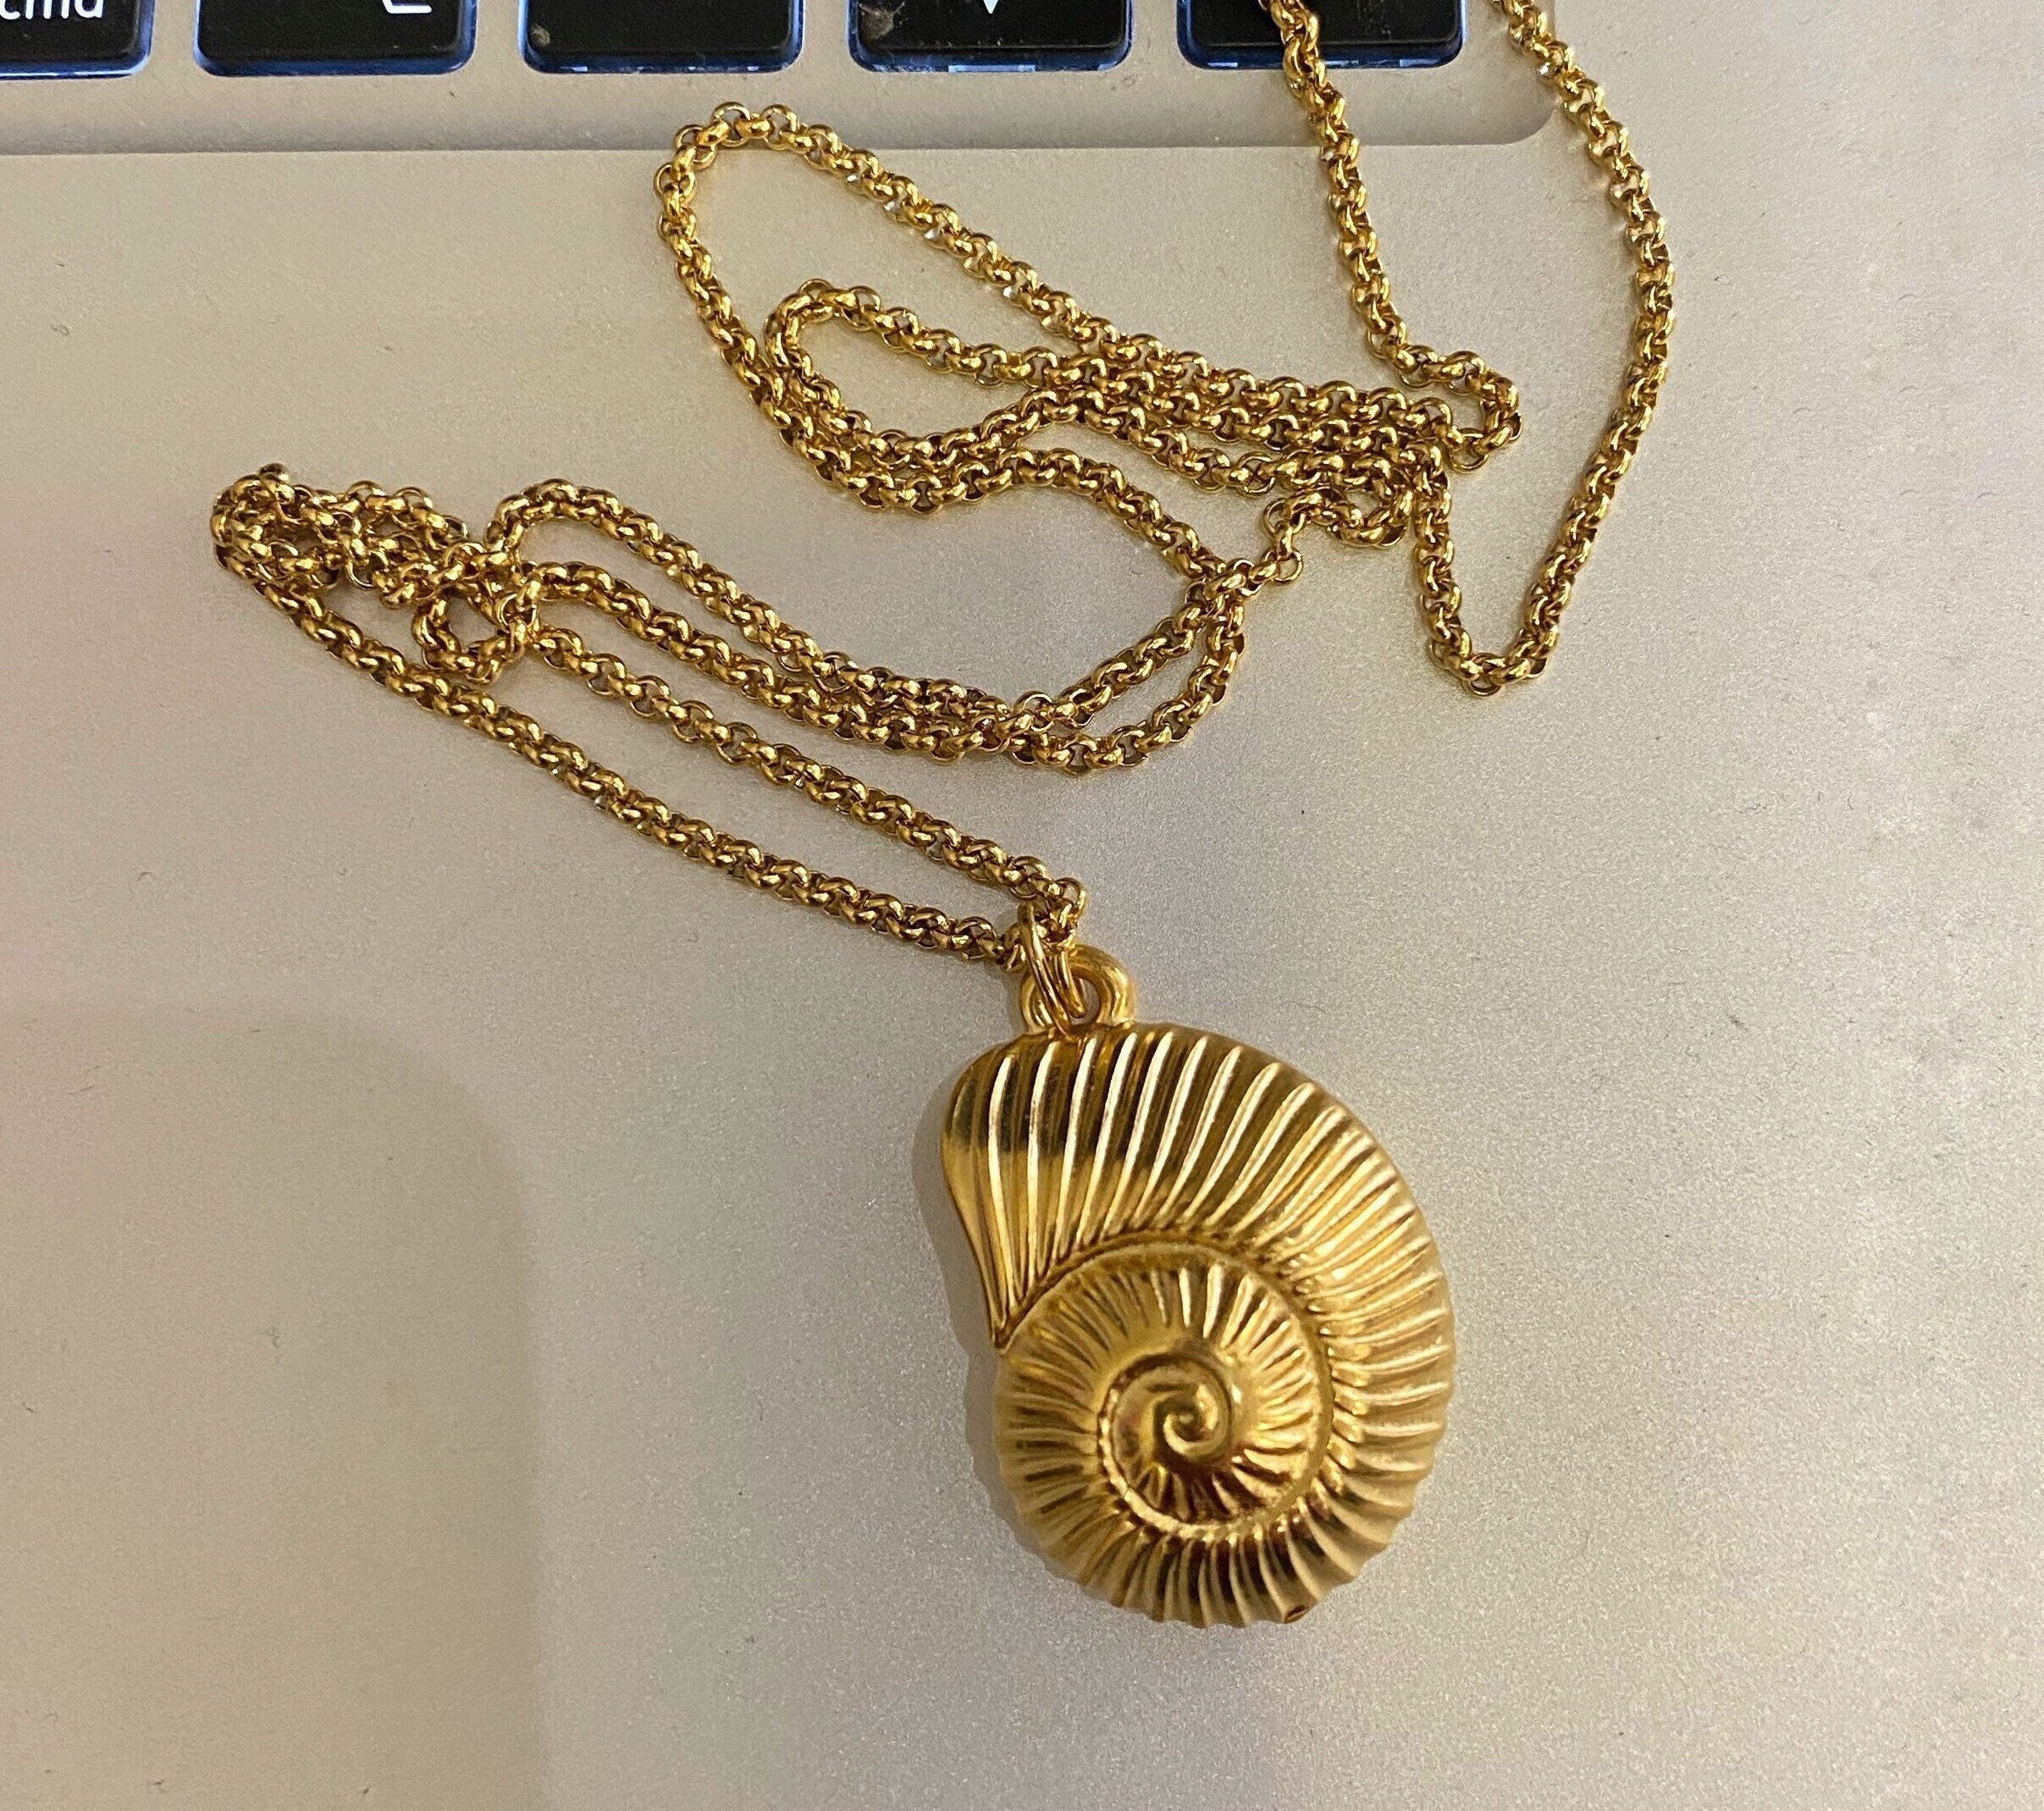 Gold Plated Shell Necklace, Long Everyday Necklace, Nautilus Pendant Necklace, Summer Jewelry, Large Seashell Necklace, Boho Chic Jewelry